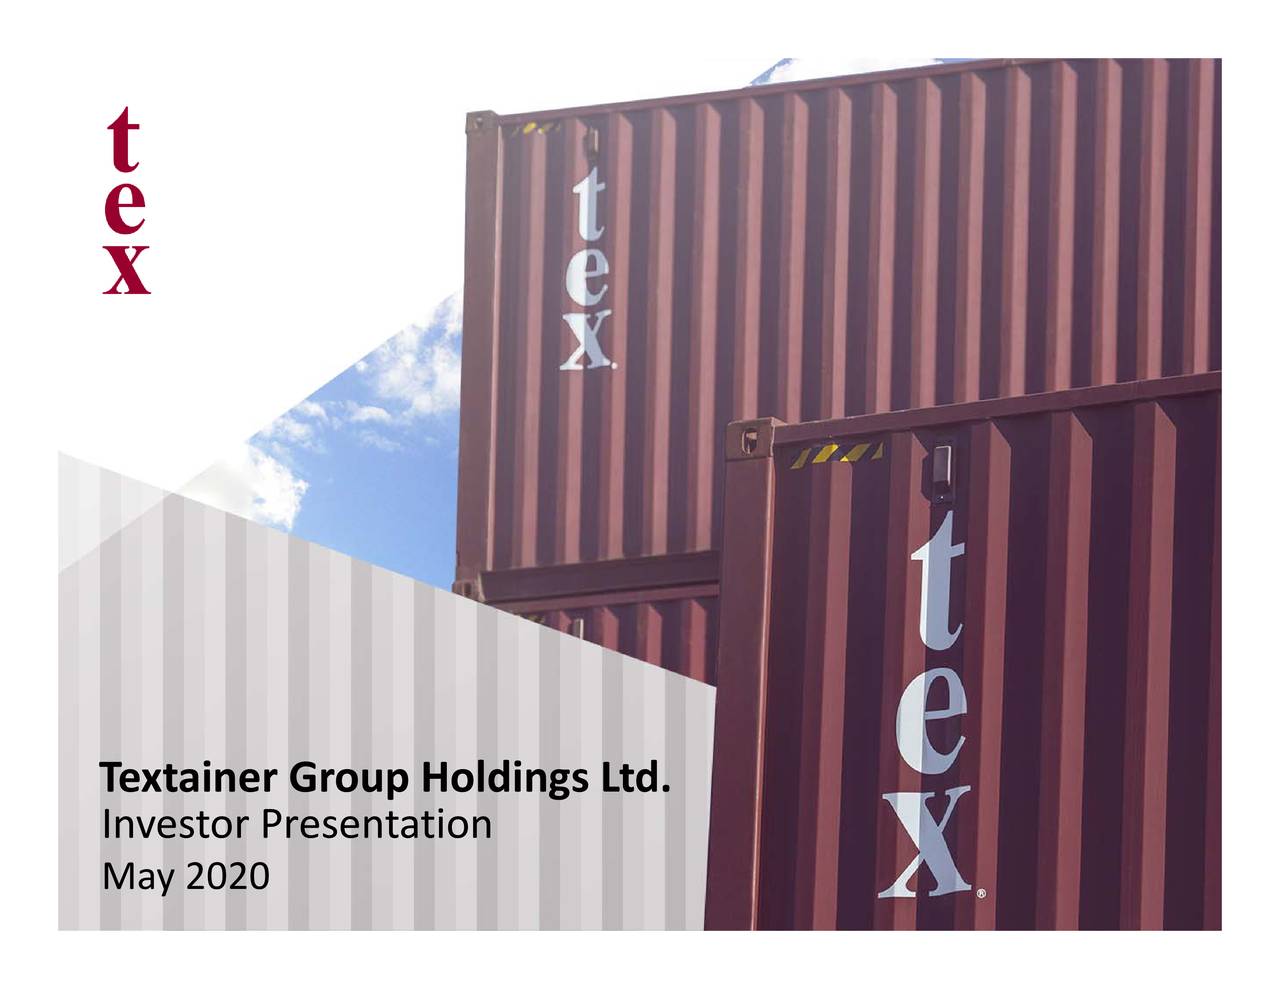 Textainer Group Holdings Ltd.